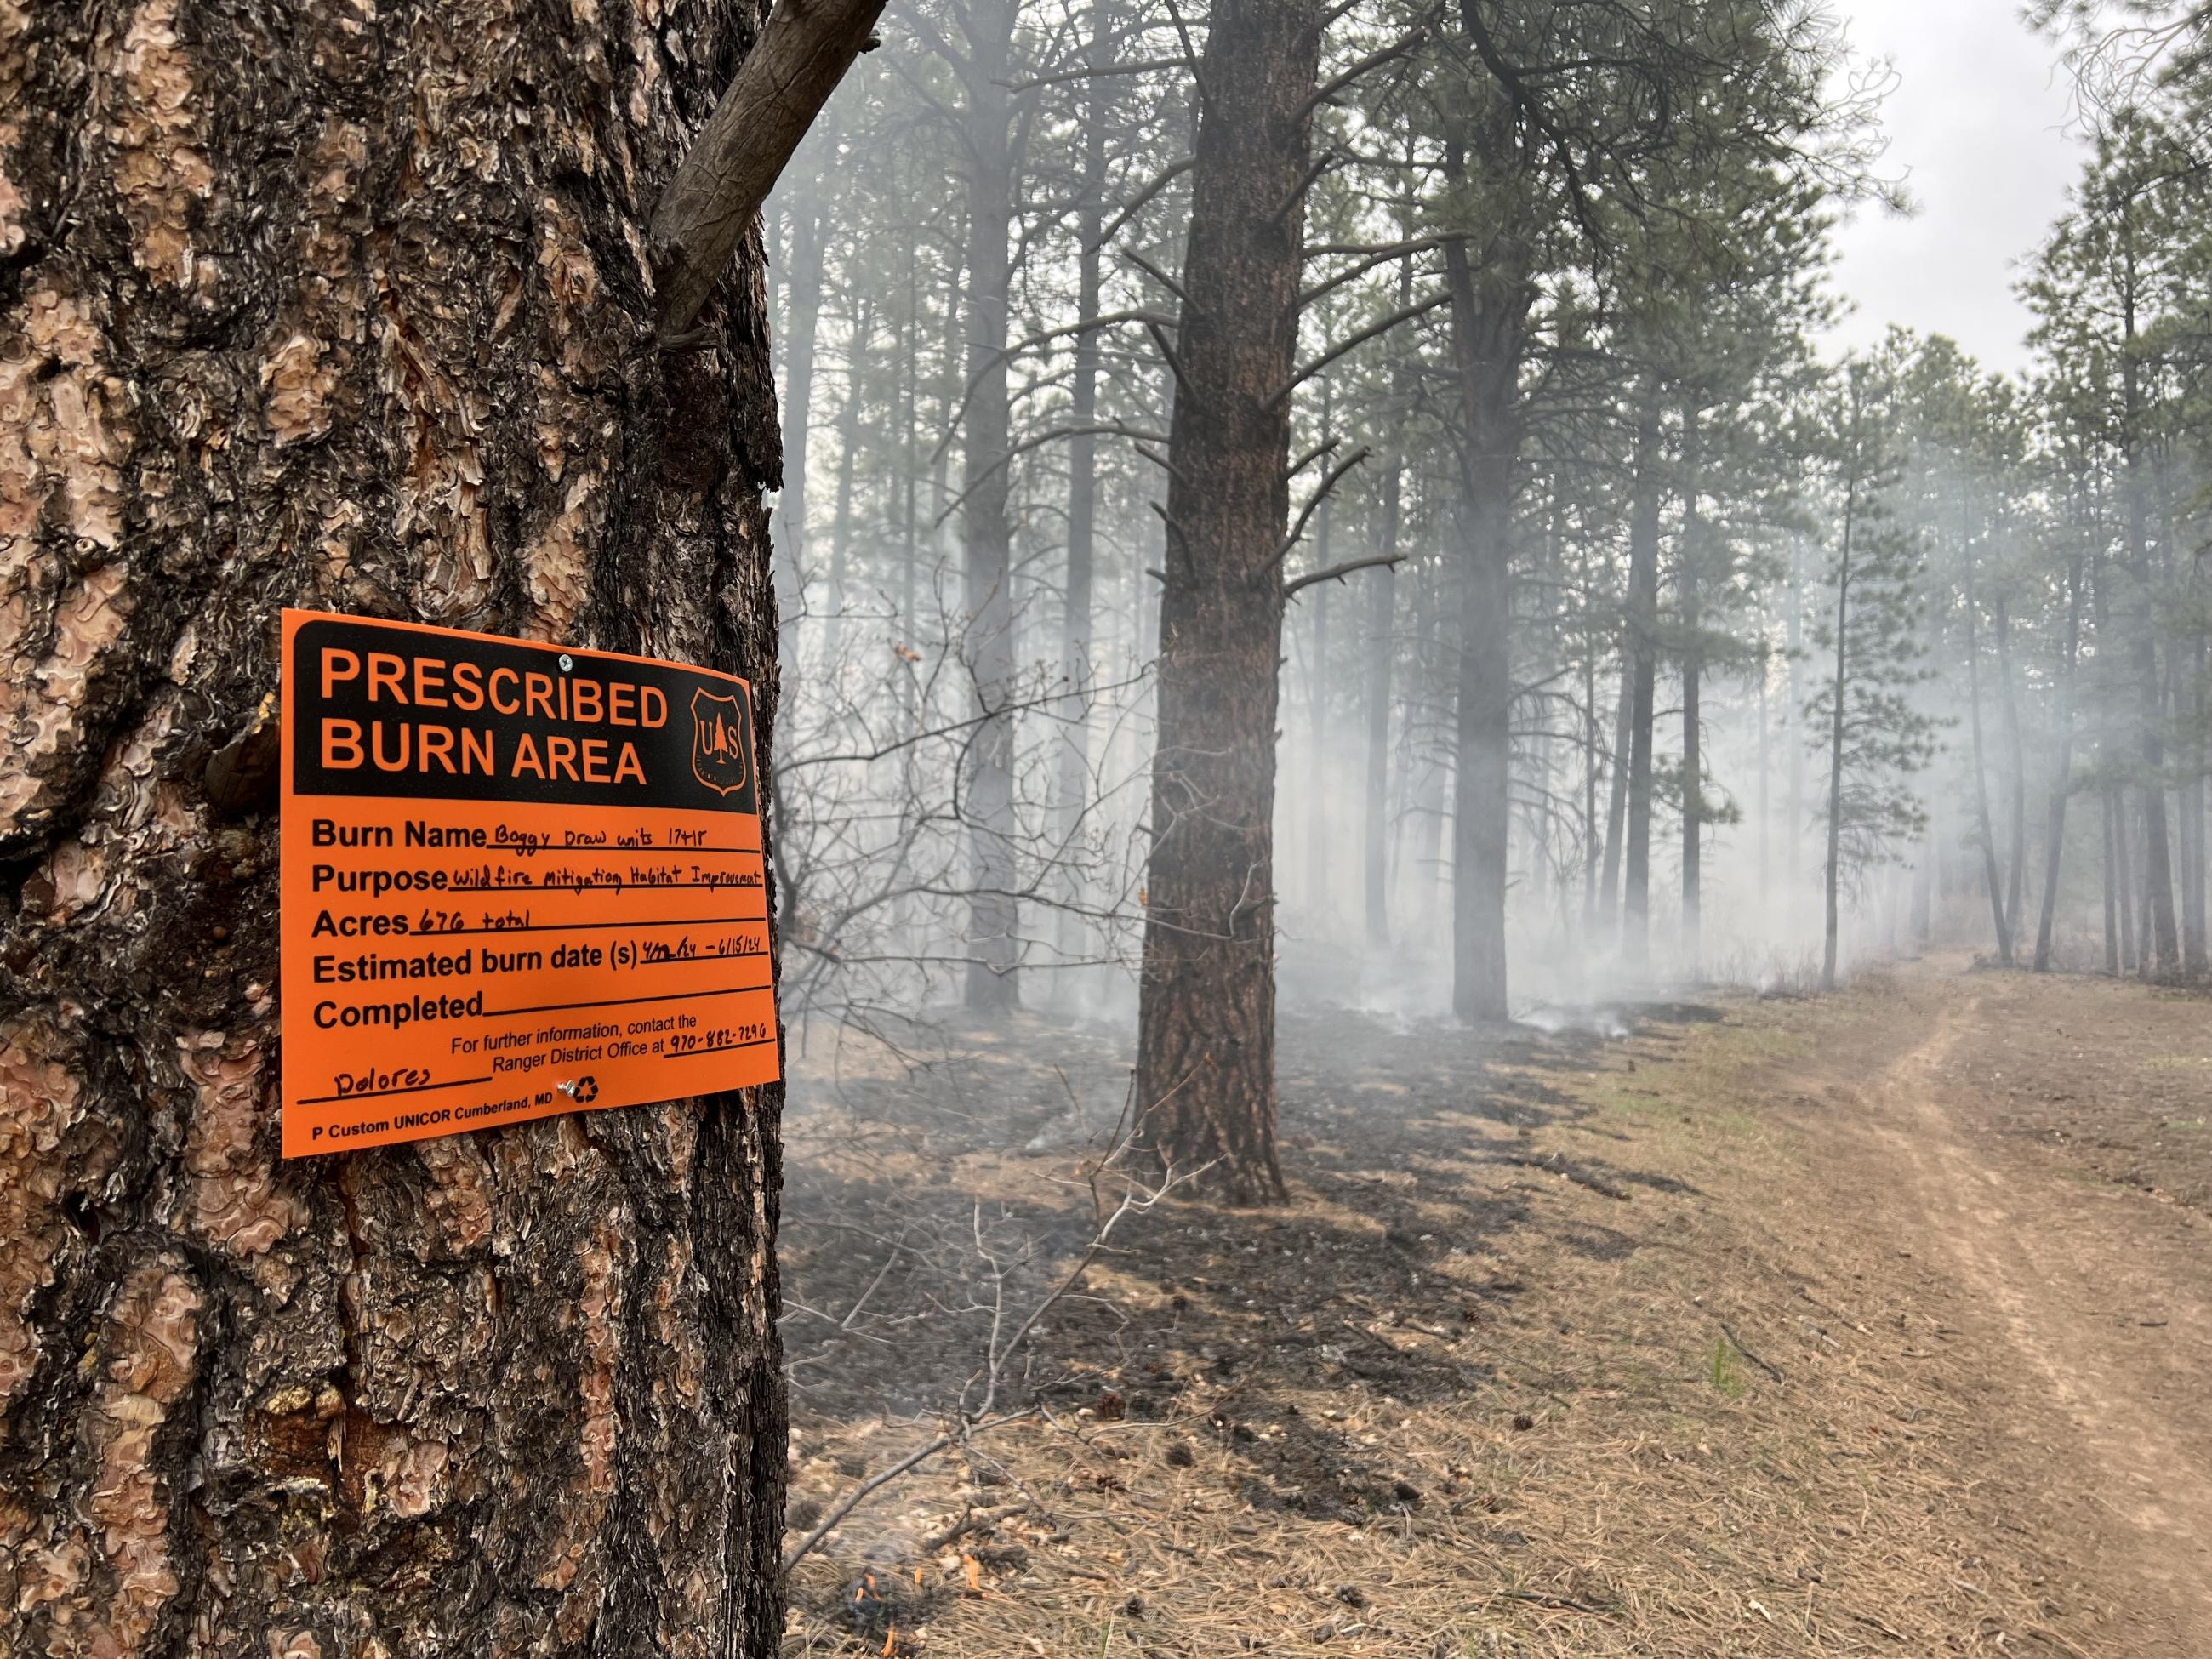 An orange sign marking the boundary of a prescribed fire is shown, stapled to a pine tree, with the ground smoking along a road in the distance.